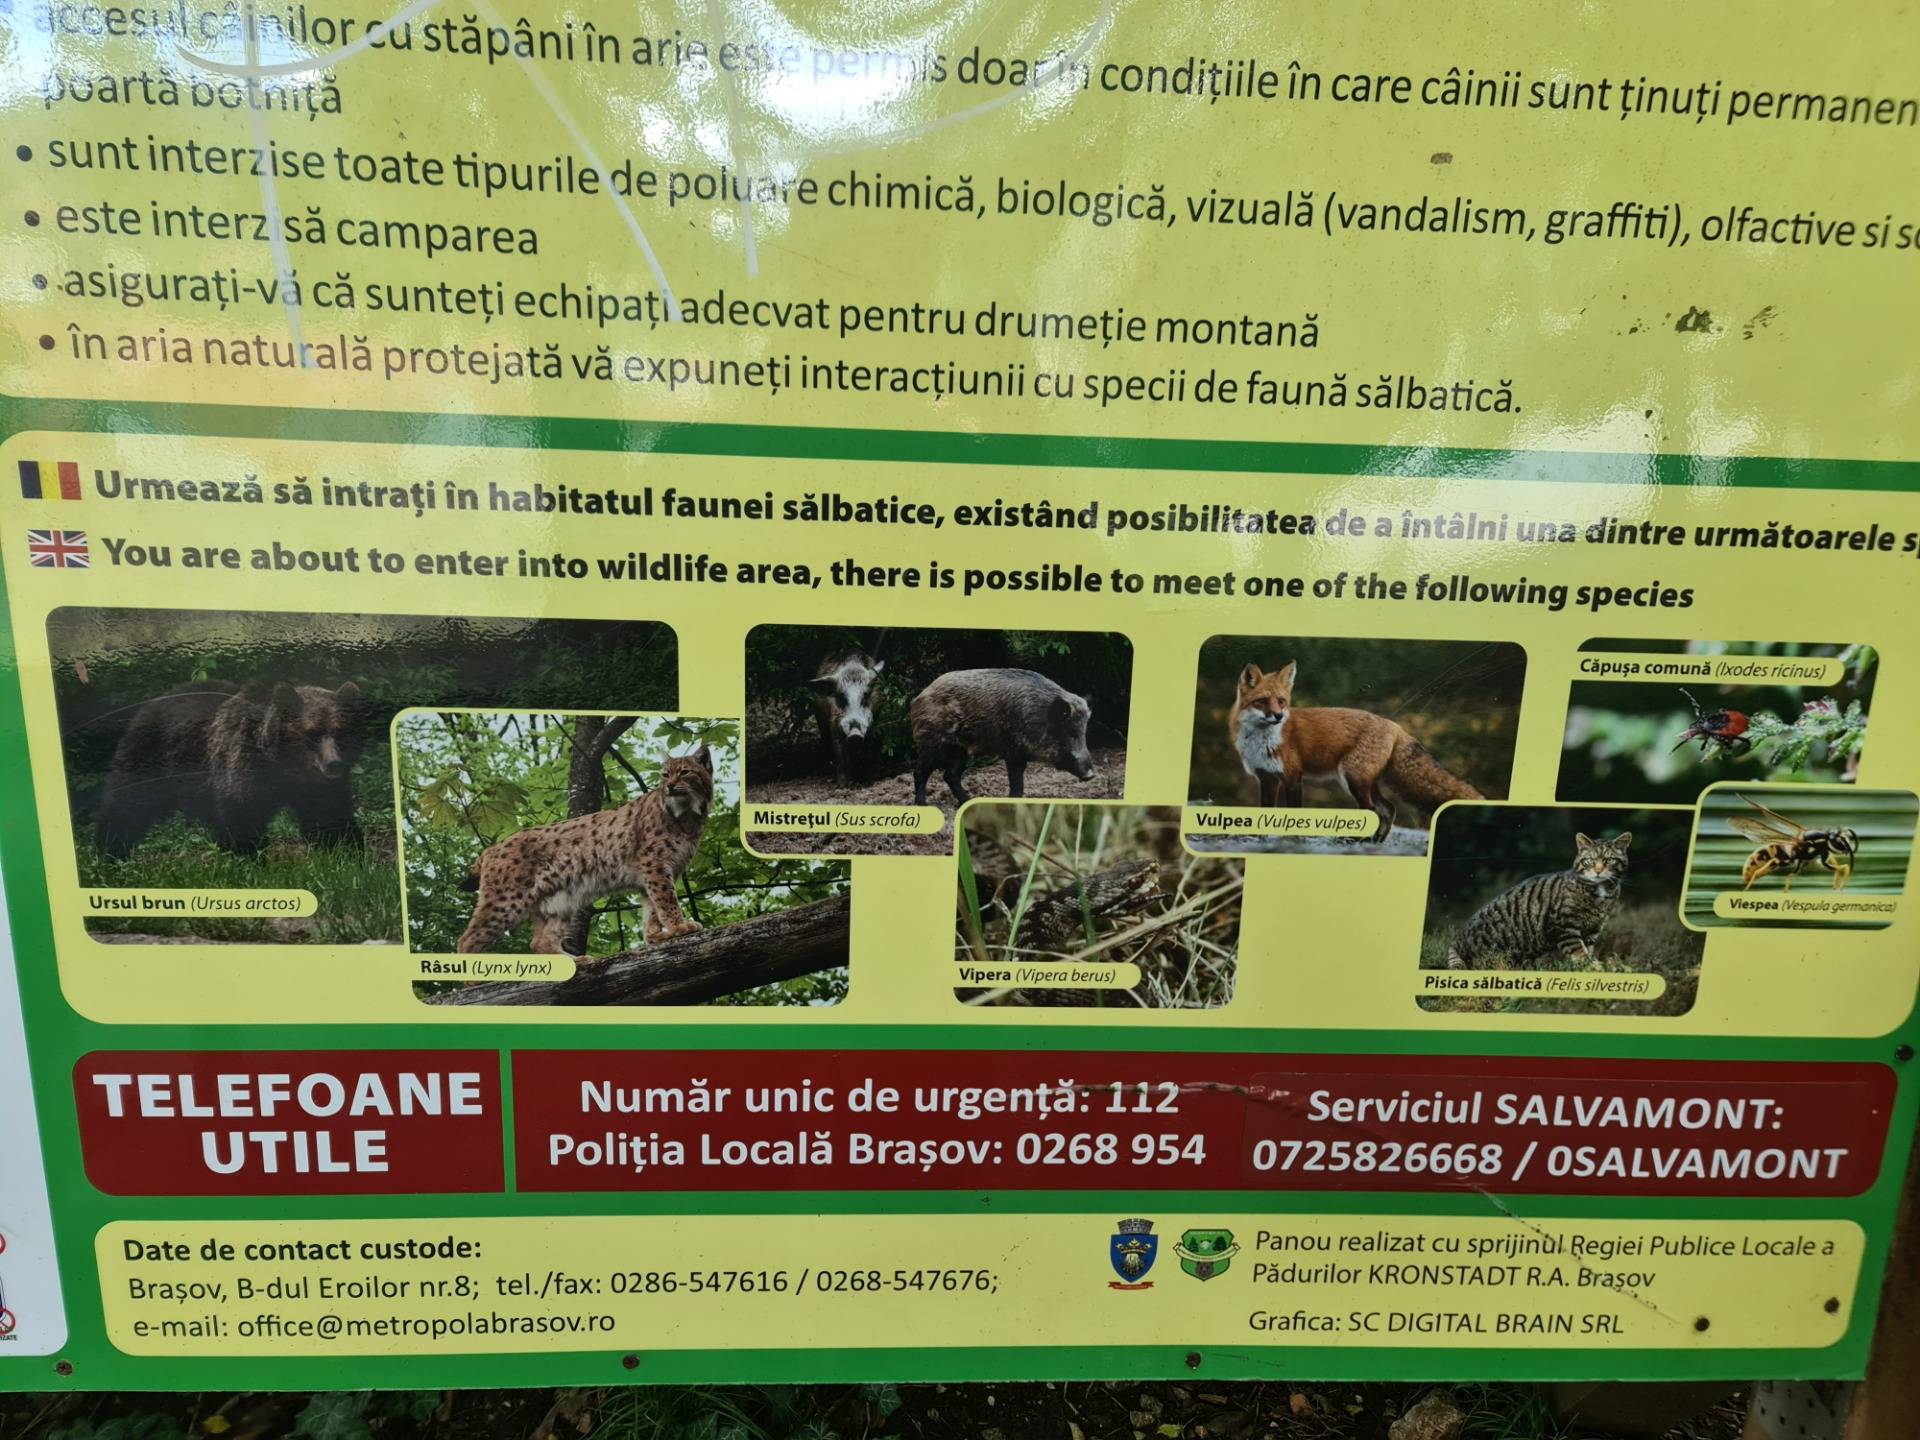 They also warn you that you’re about entering a wildlife area with brown bears among the species inside it.